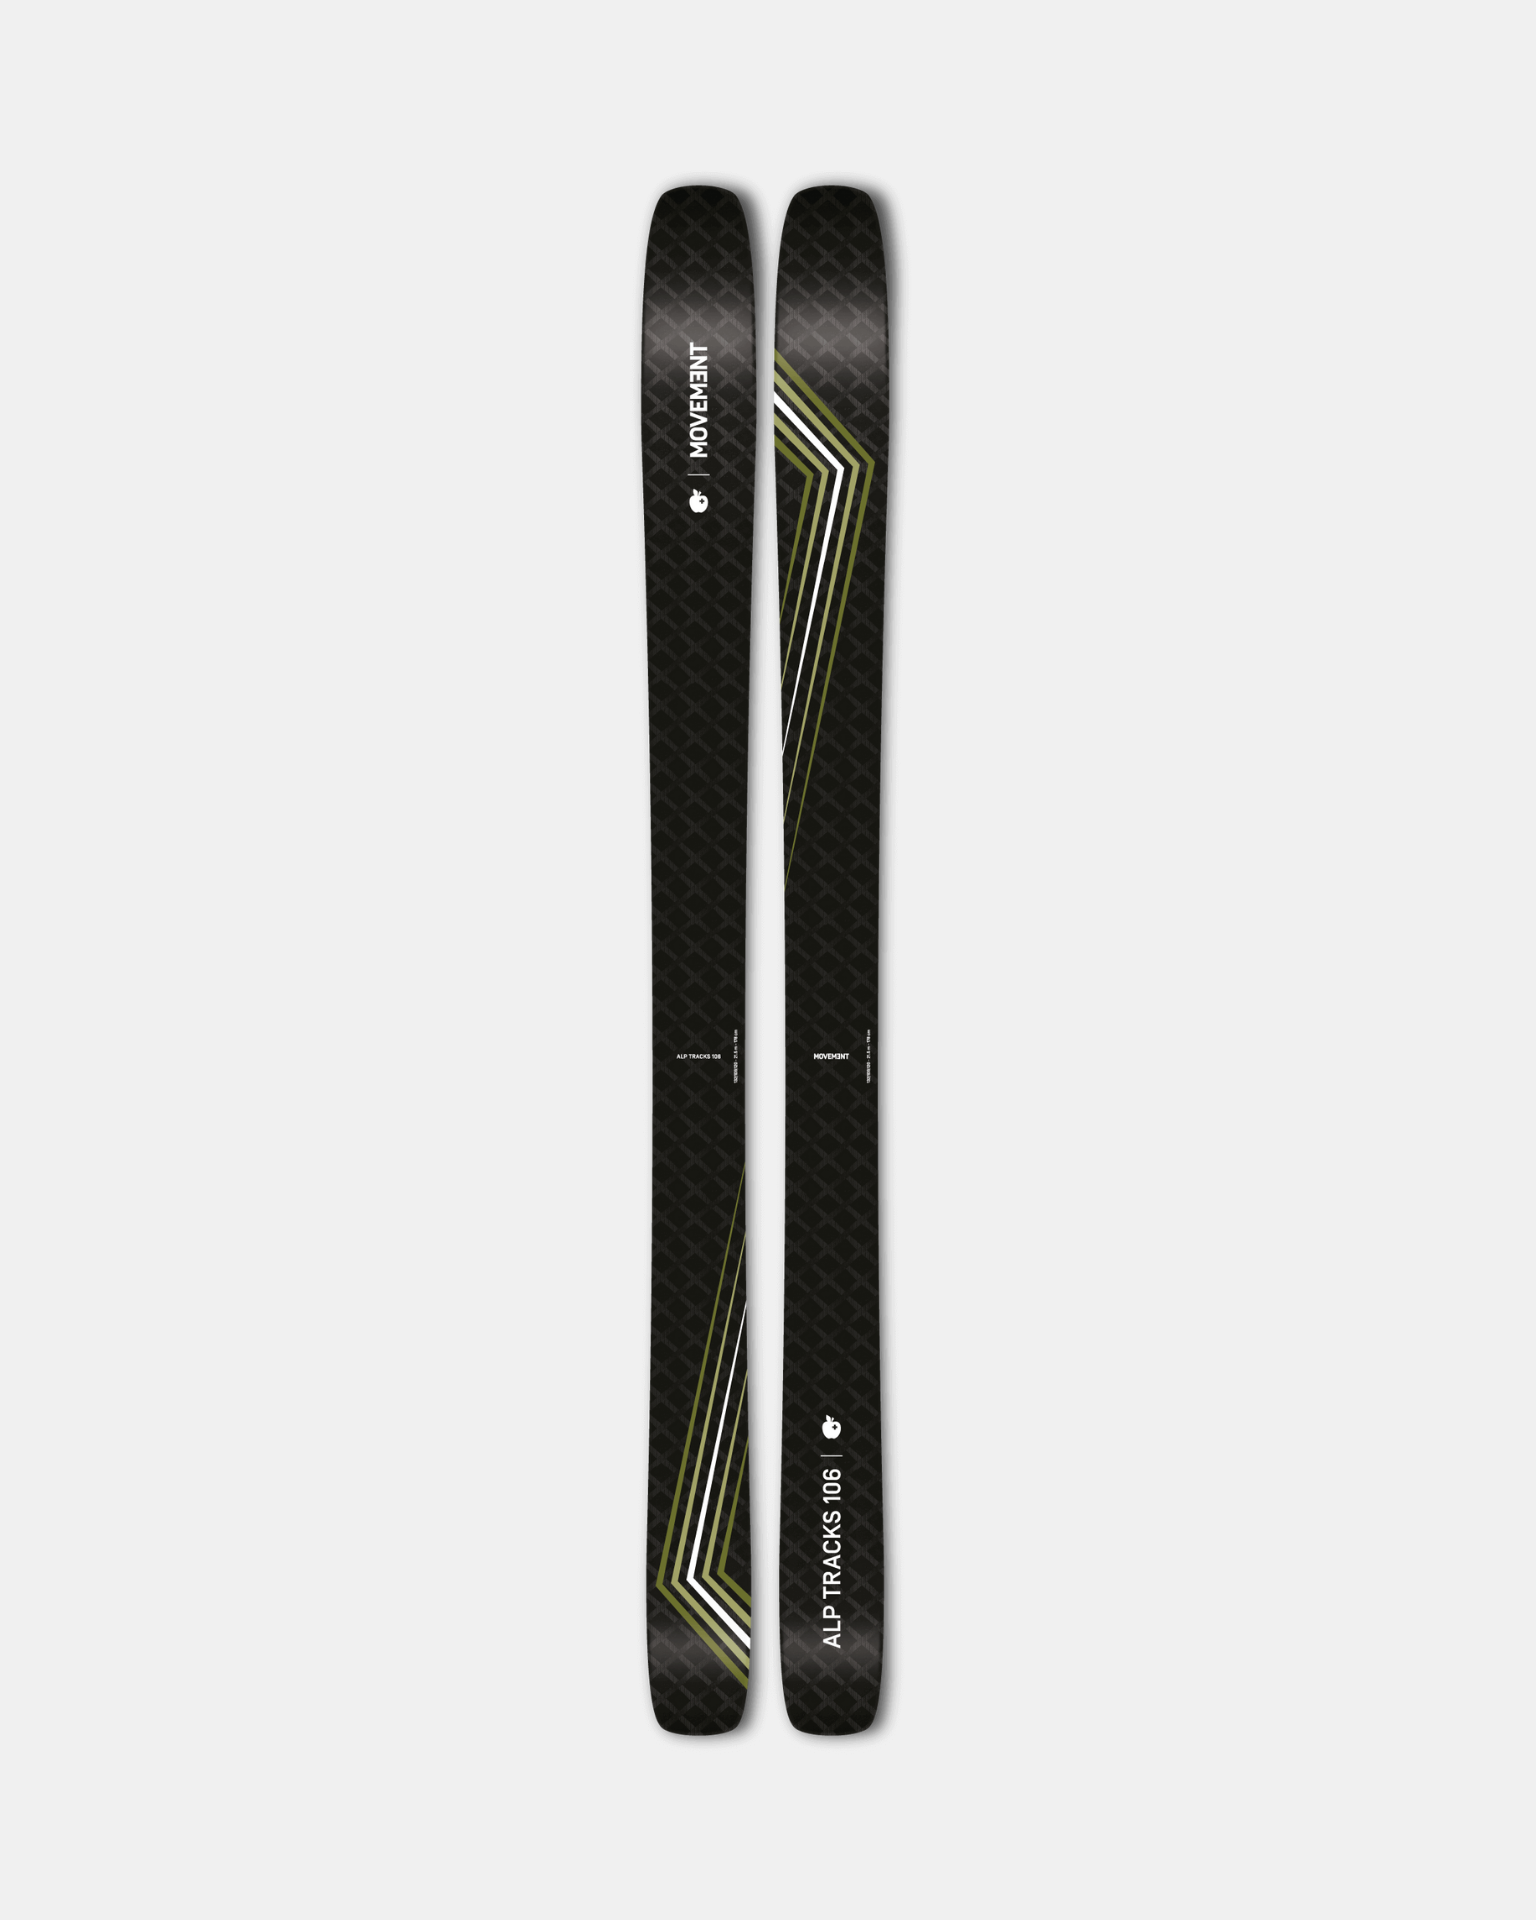 Embark on unforgettable touring adventures with Movement's Alp Tracks 106 skis.